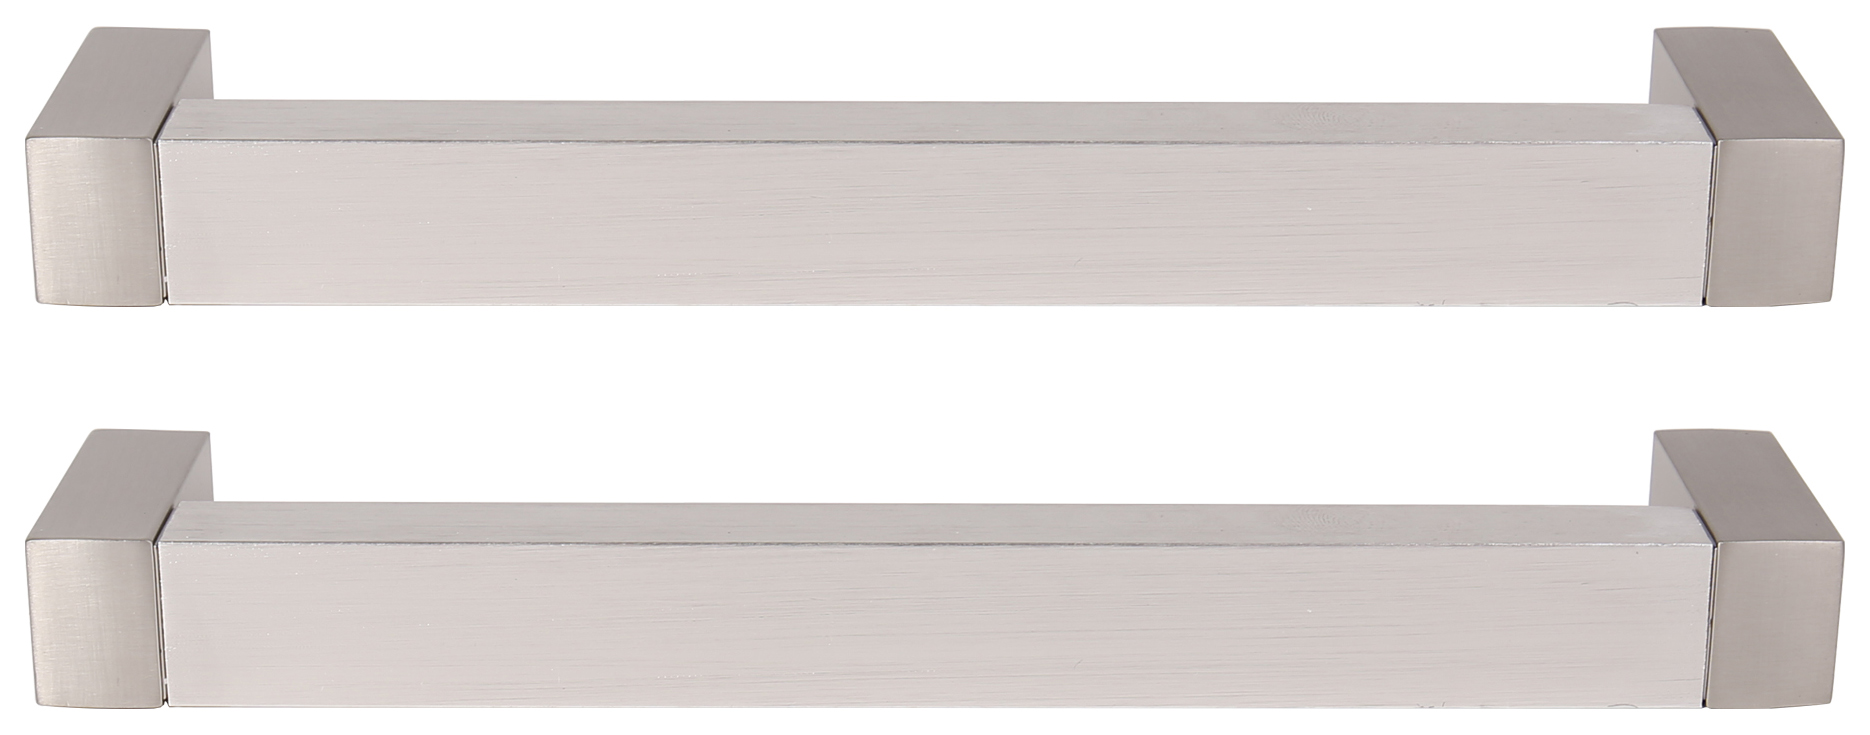 Image of Flat Cabinet Handle Stainless Steel 160mm - Pack of 2